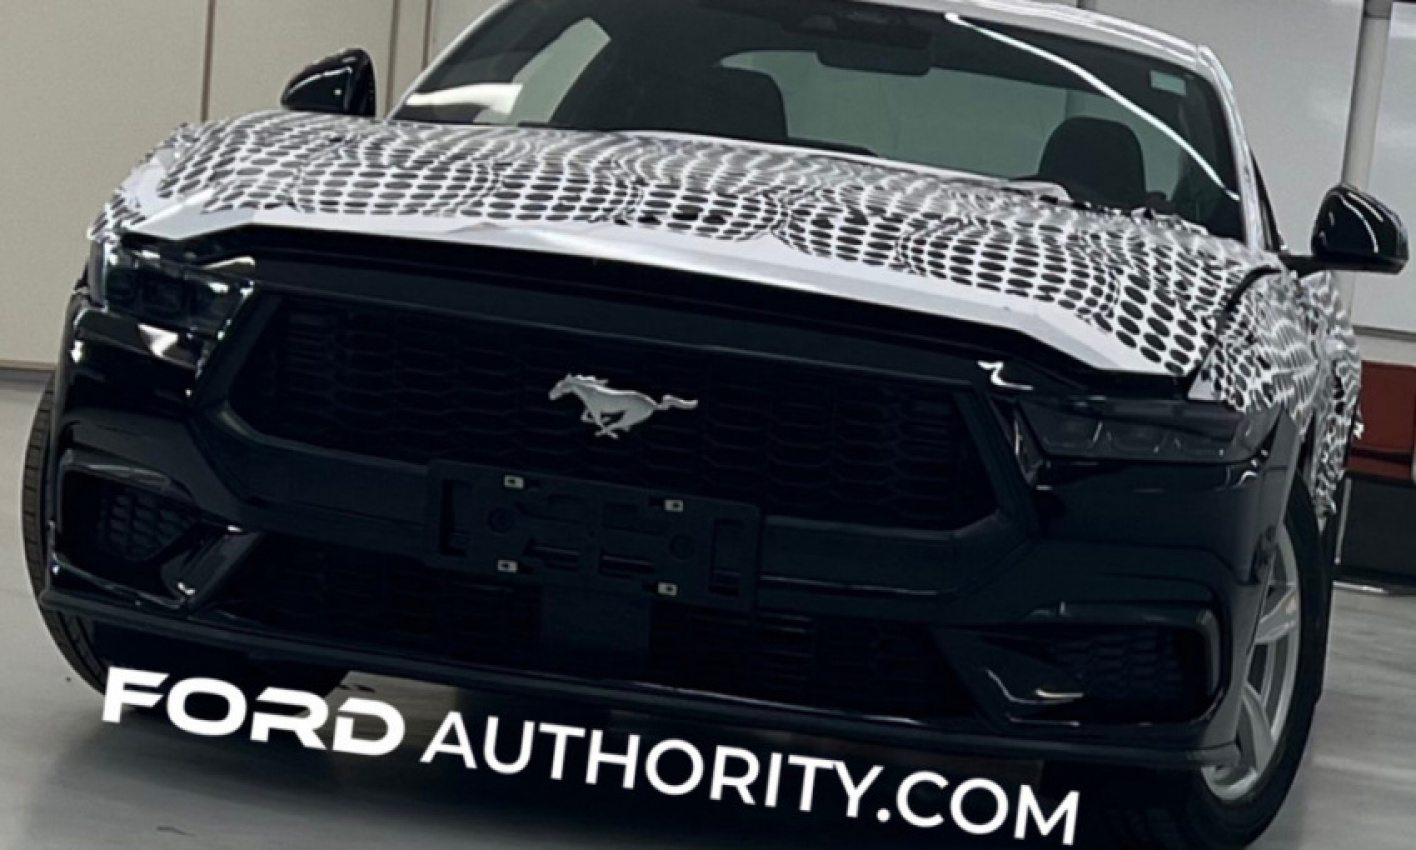 all news, autos, cars, ford, ford mustang, mustang, seventh gen ford mustang, spy, spy shots, seventh gen ford mustang boasts softer lines in teased front end image